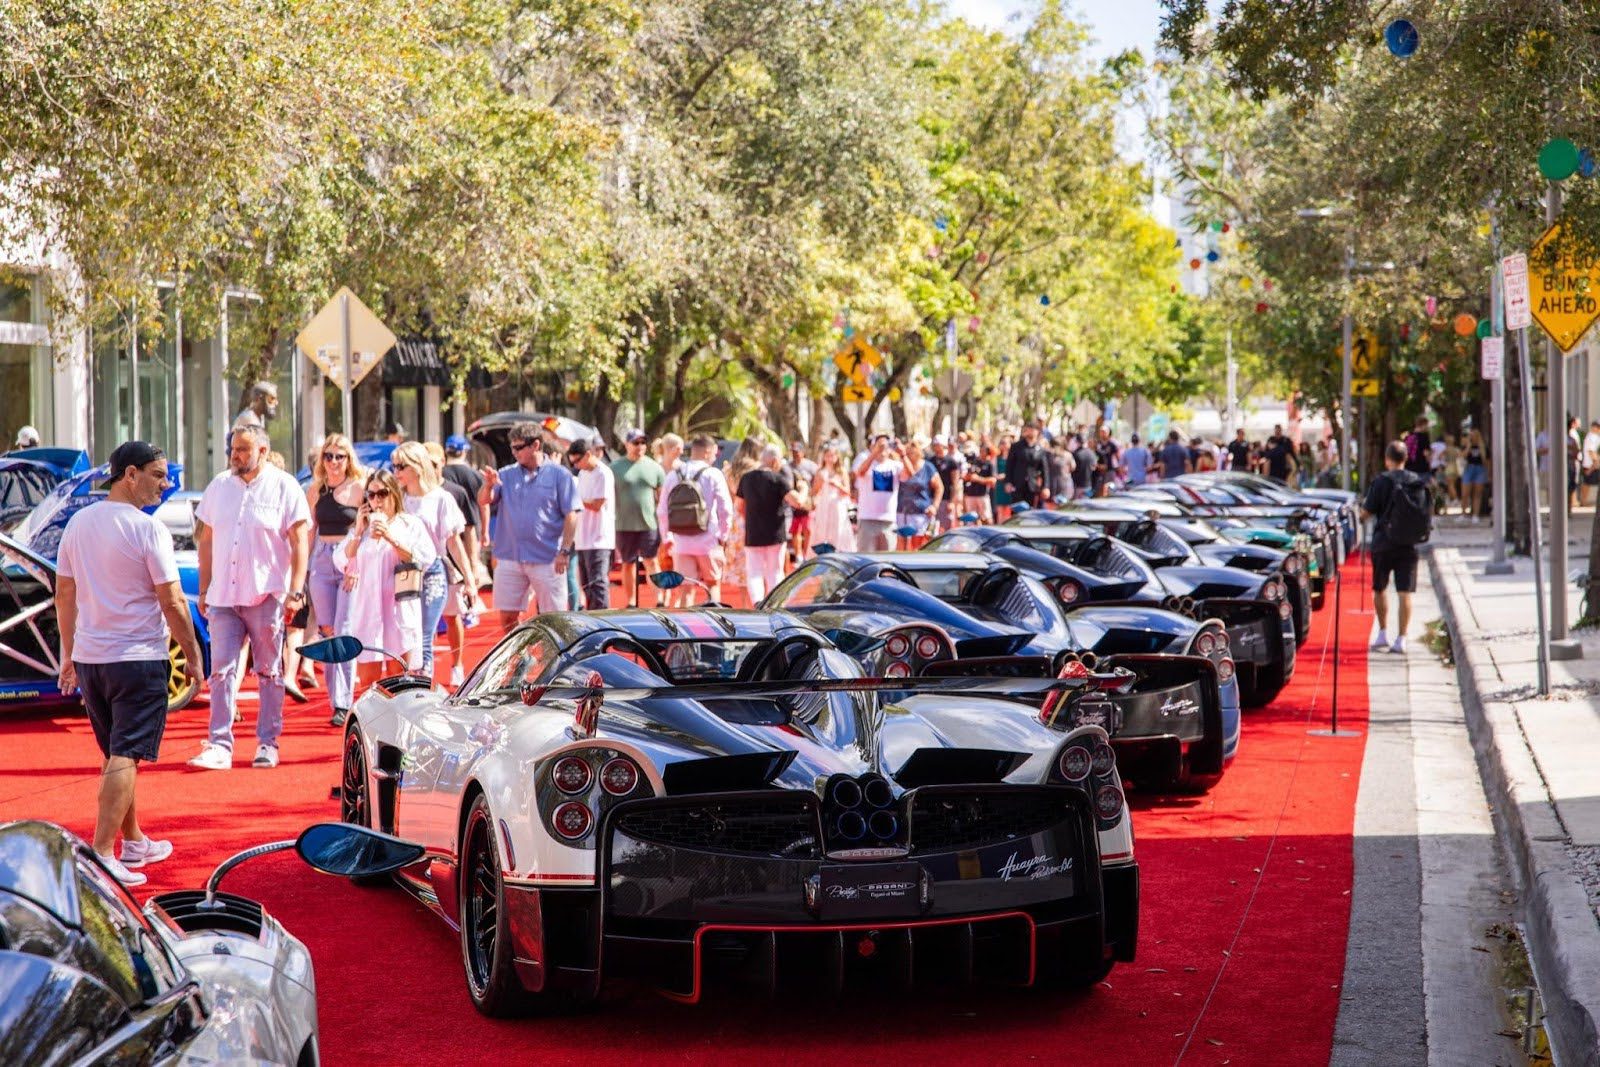 duPont REGISTRY Group Acquires Part of the Miami Concours in the World